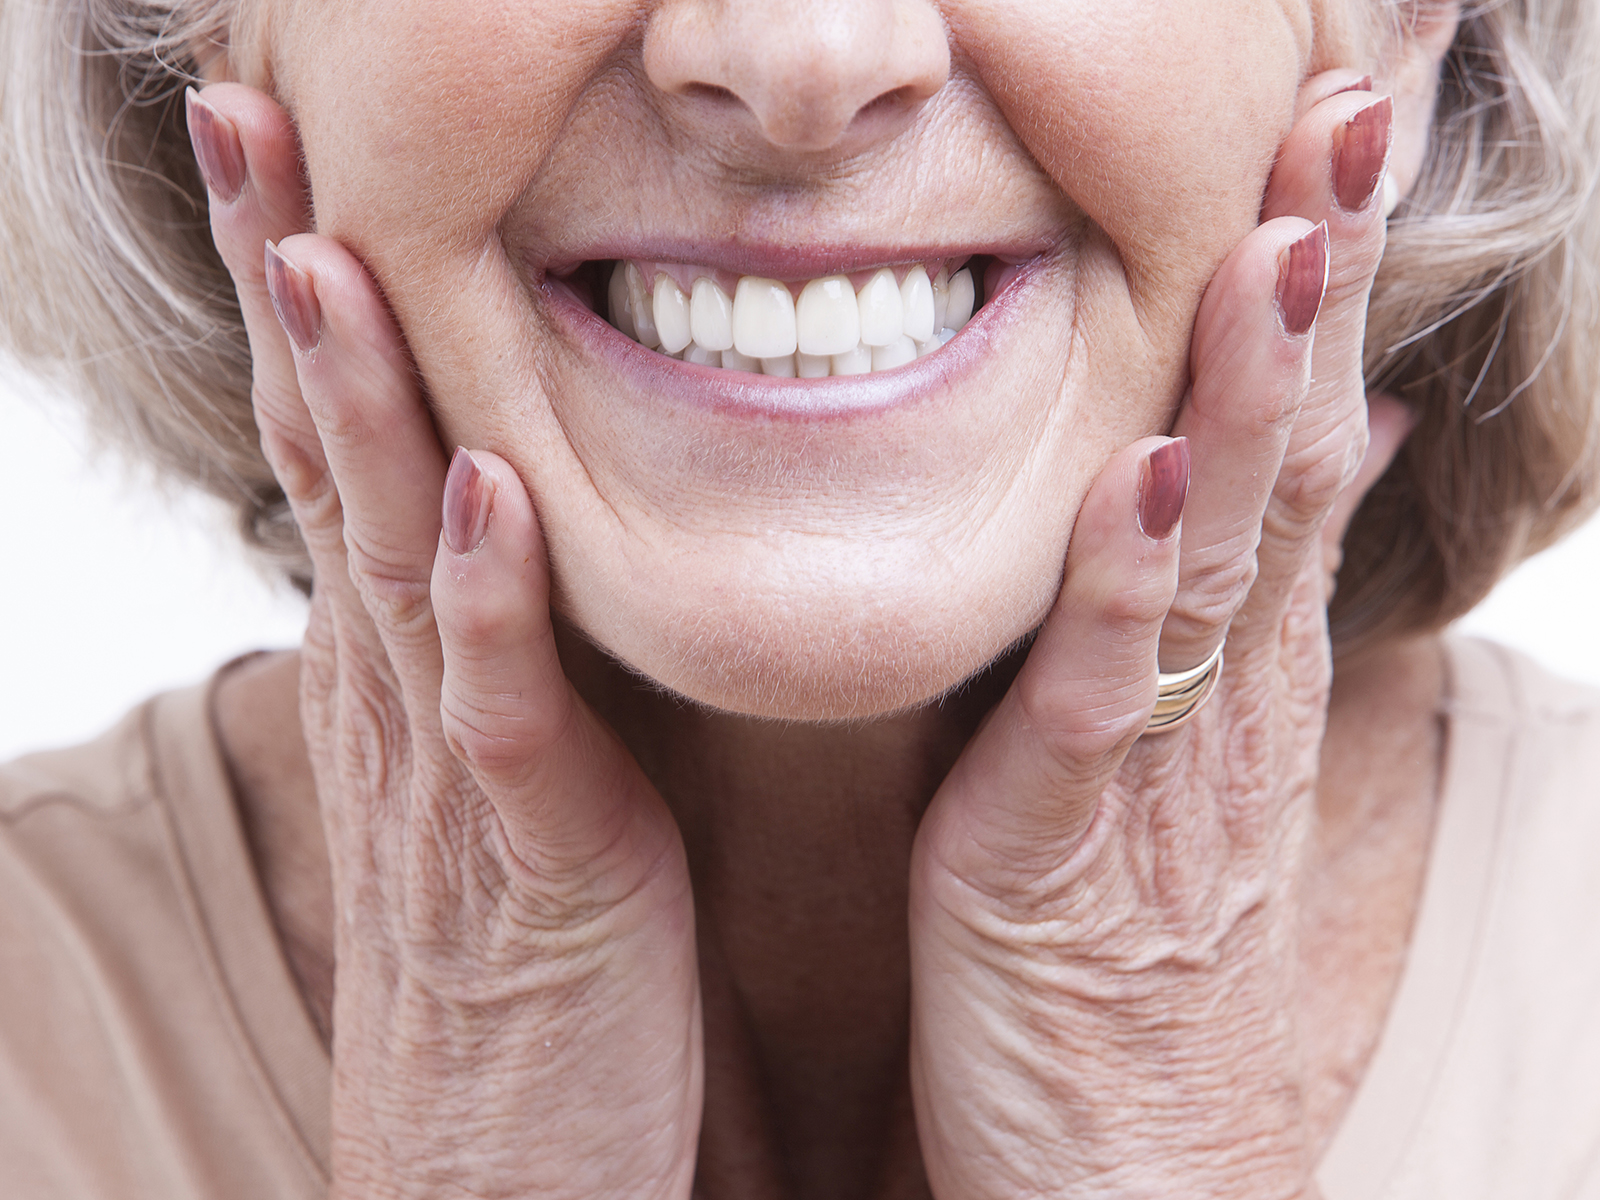 What happens if you don’t take your dentures out at night?